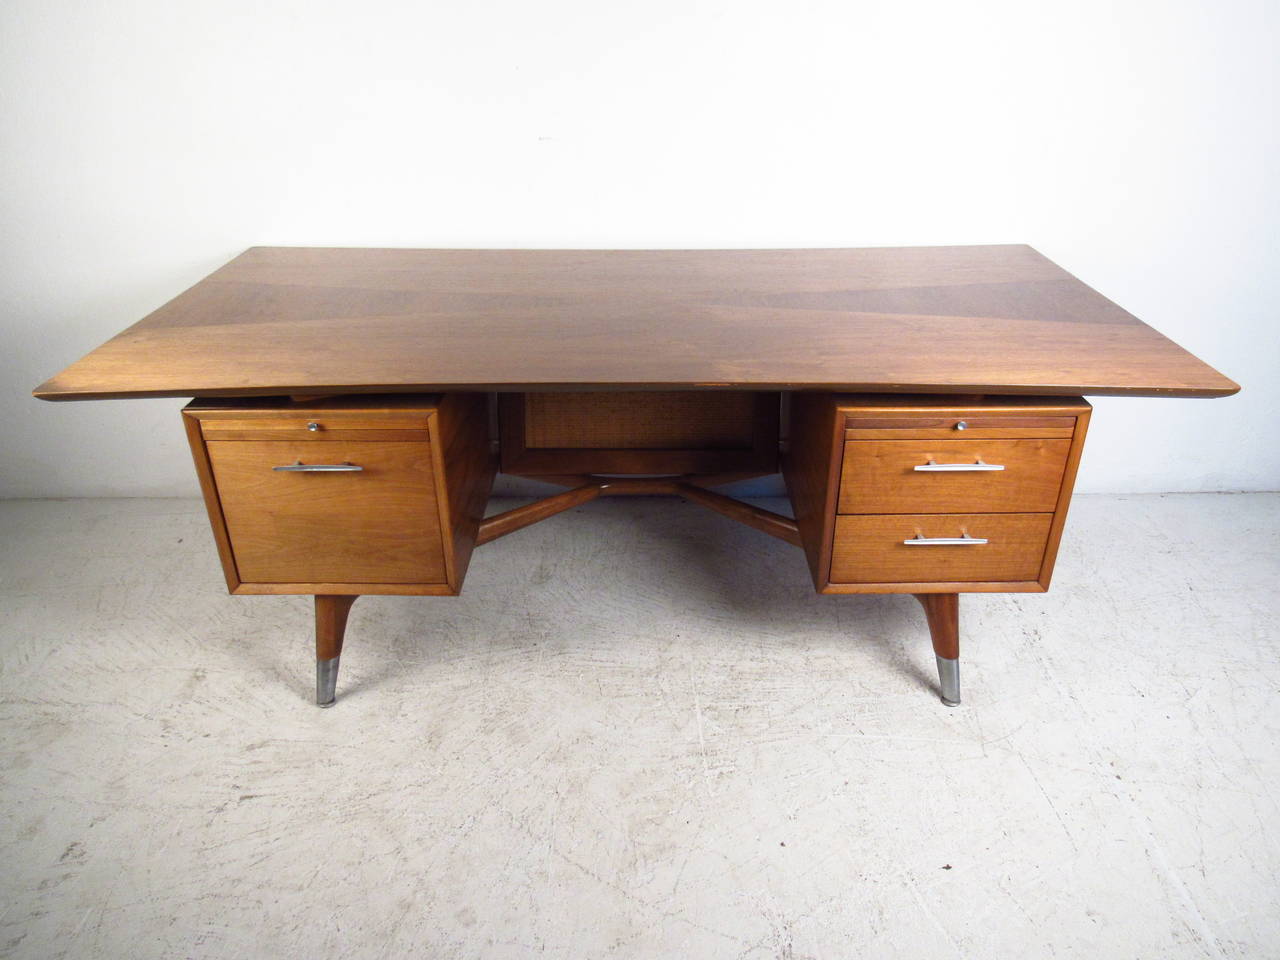 This beautiful vintage executive desk is a large and stylish solution for any workspace. Plenty of drawer storage, added pullout work surfaces, and wonderful style components. Tapered legs, cane back, and unique drawer pulls compliment the unique